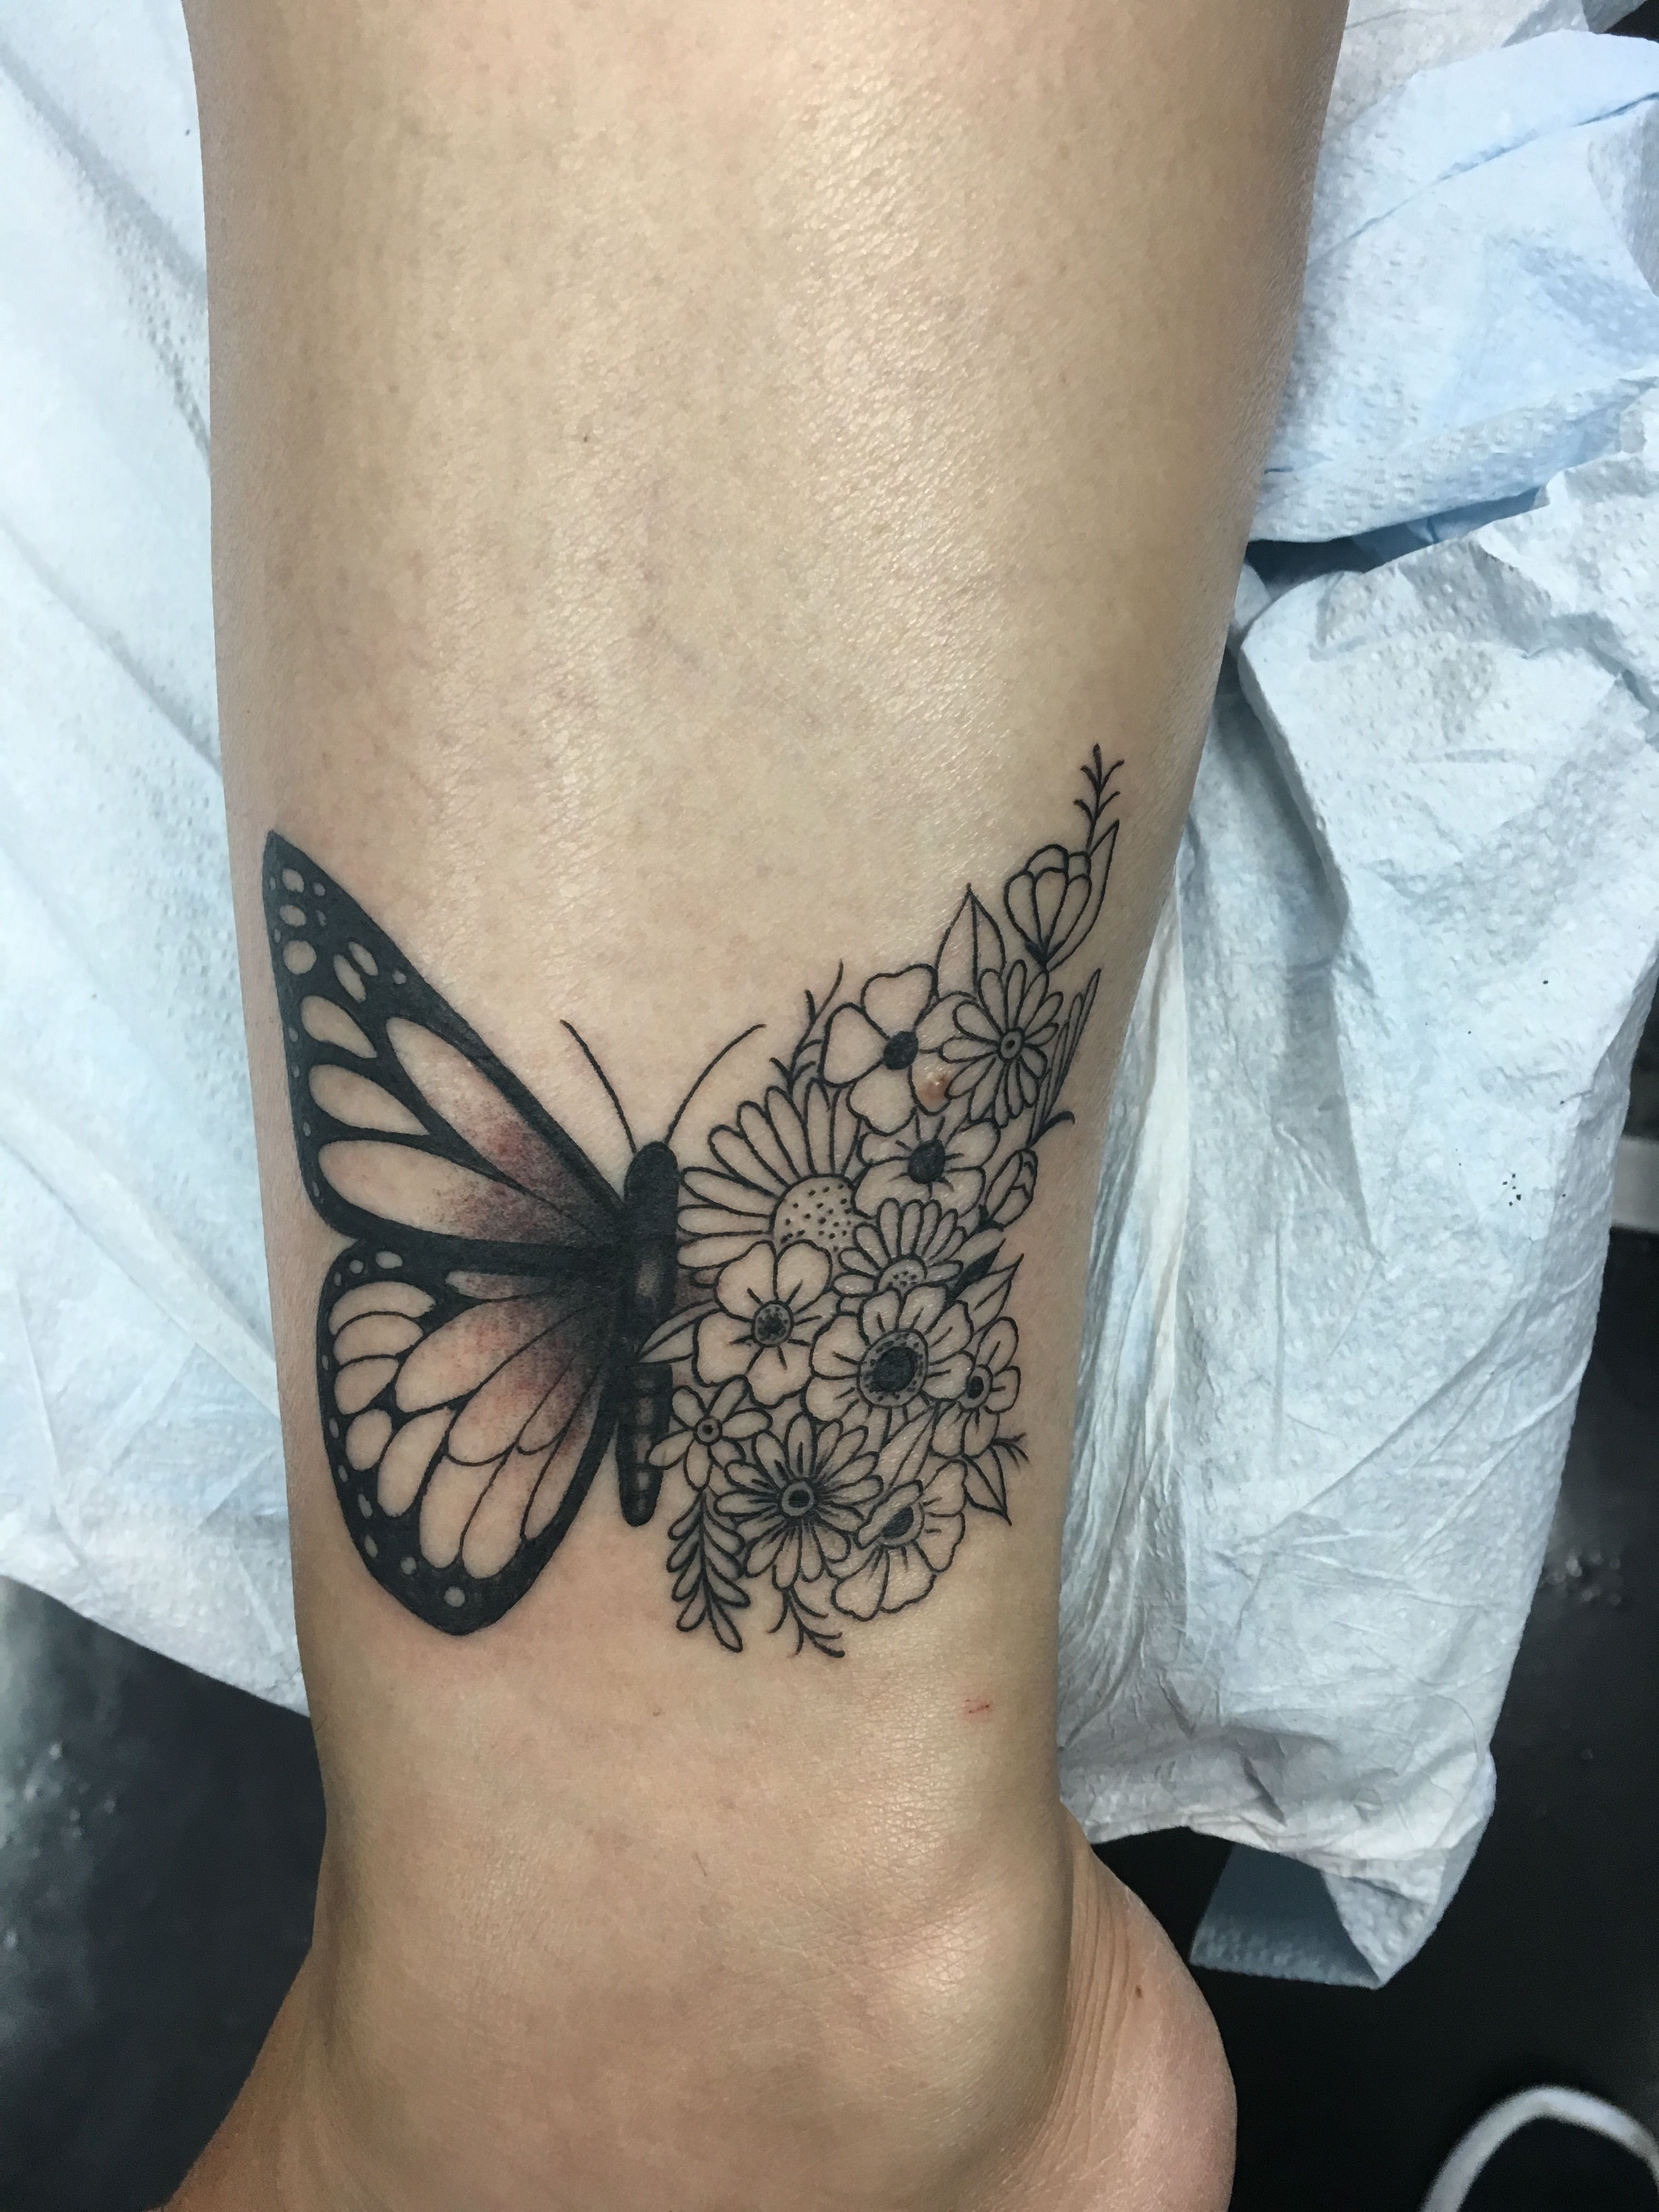 Love My New Butterfly Flower Tattoolooks Perfect On My Ankle in size 3024 X 4032